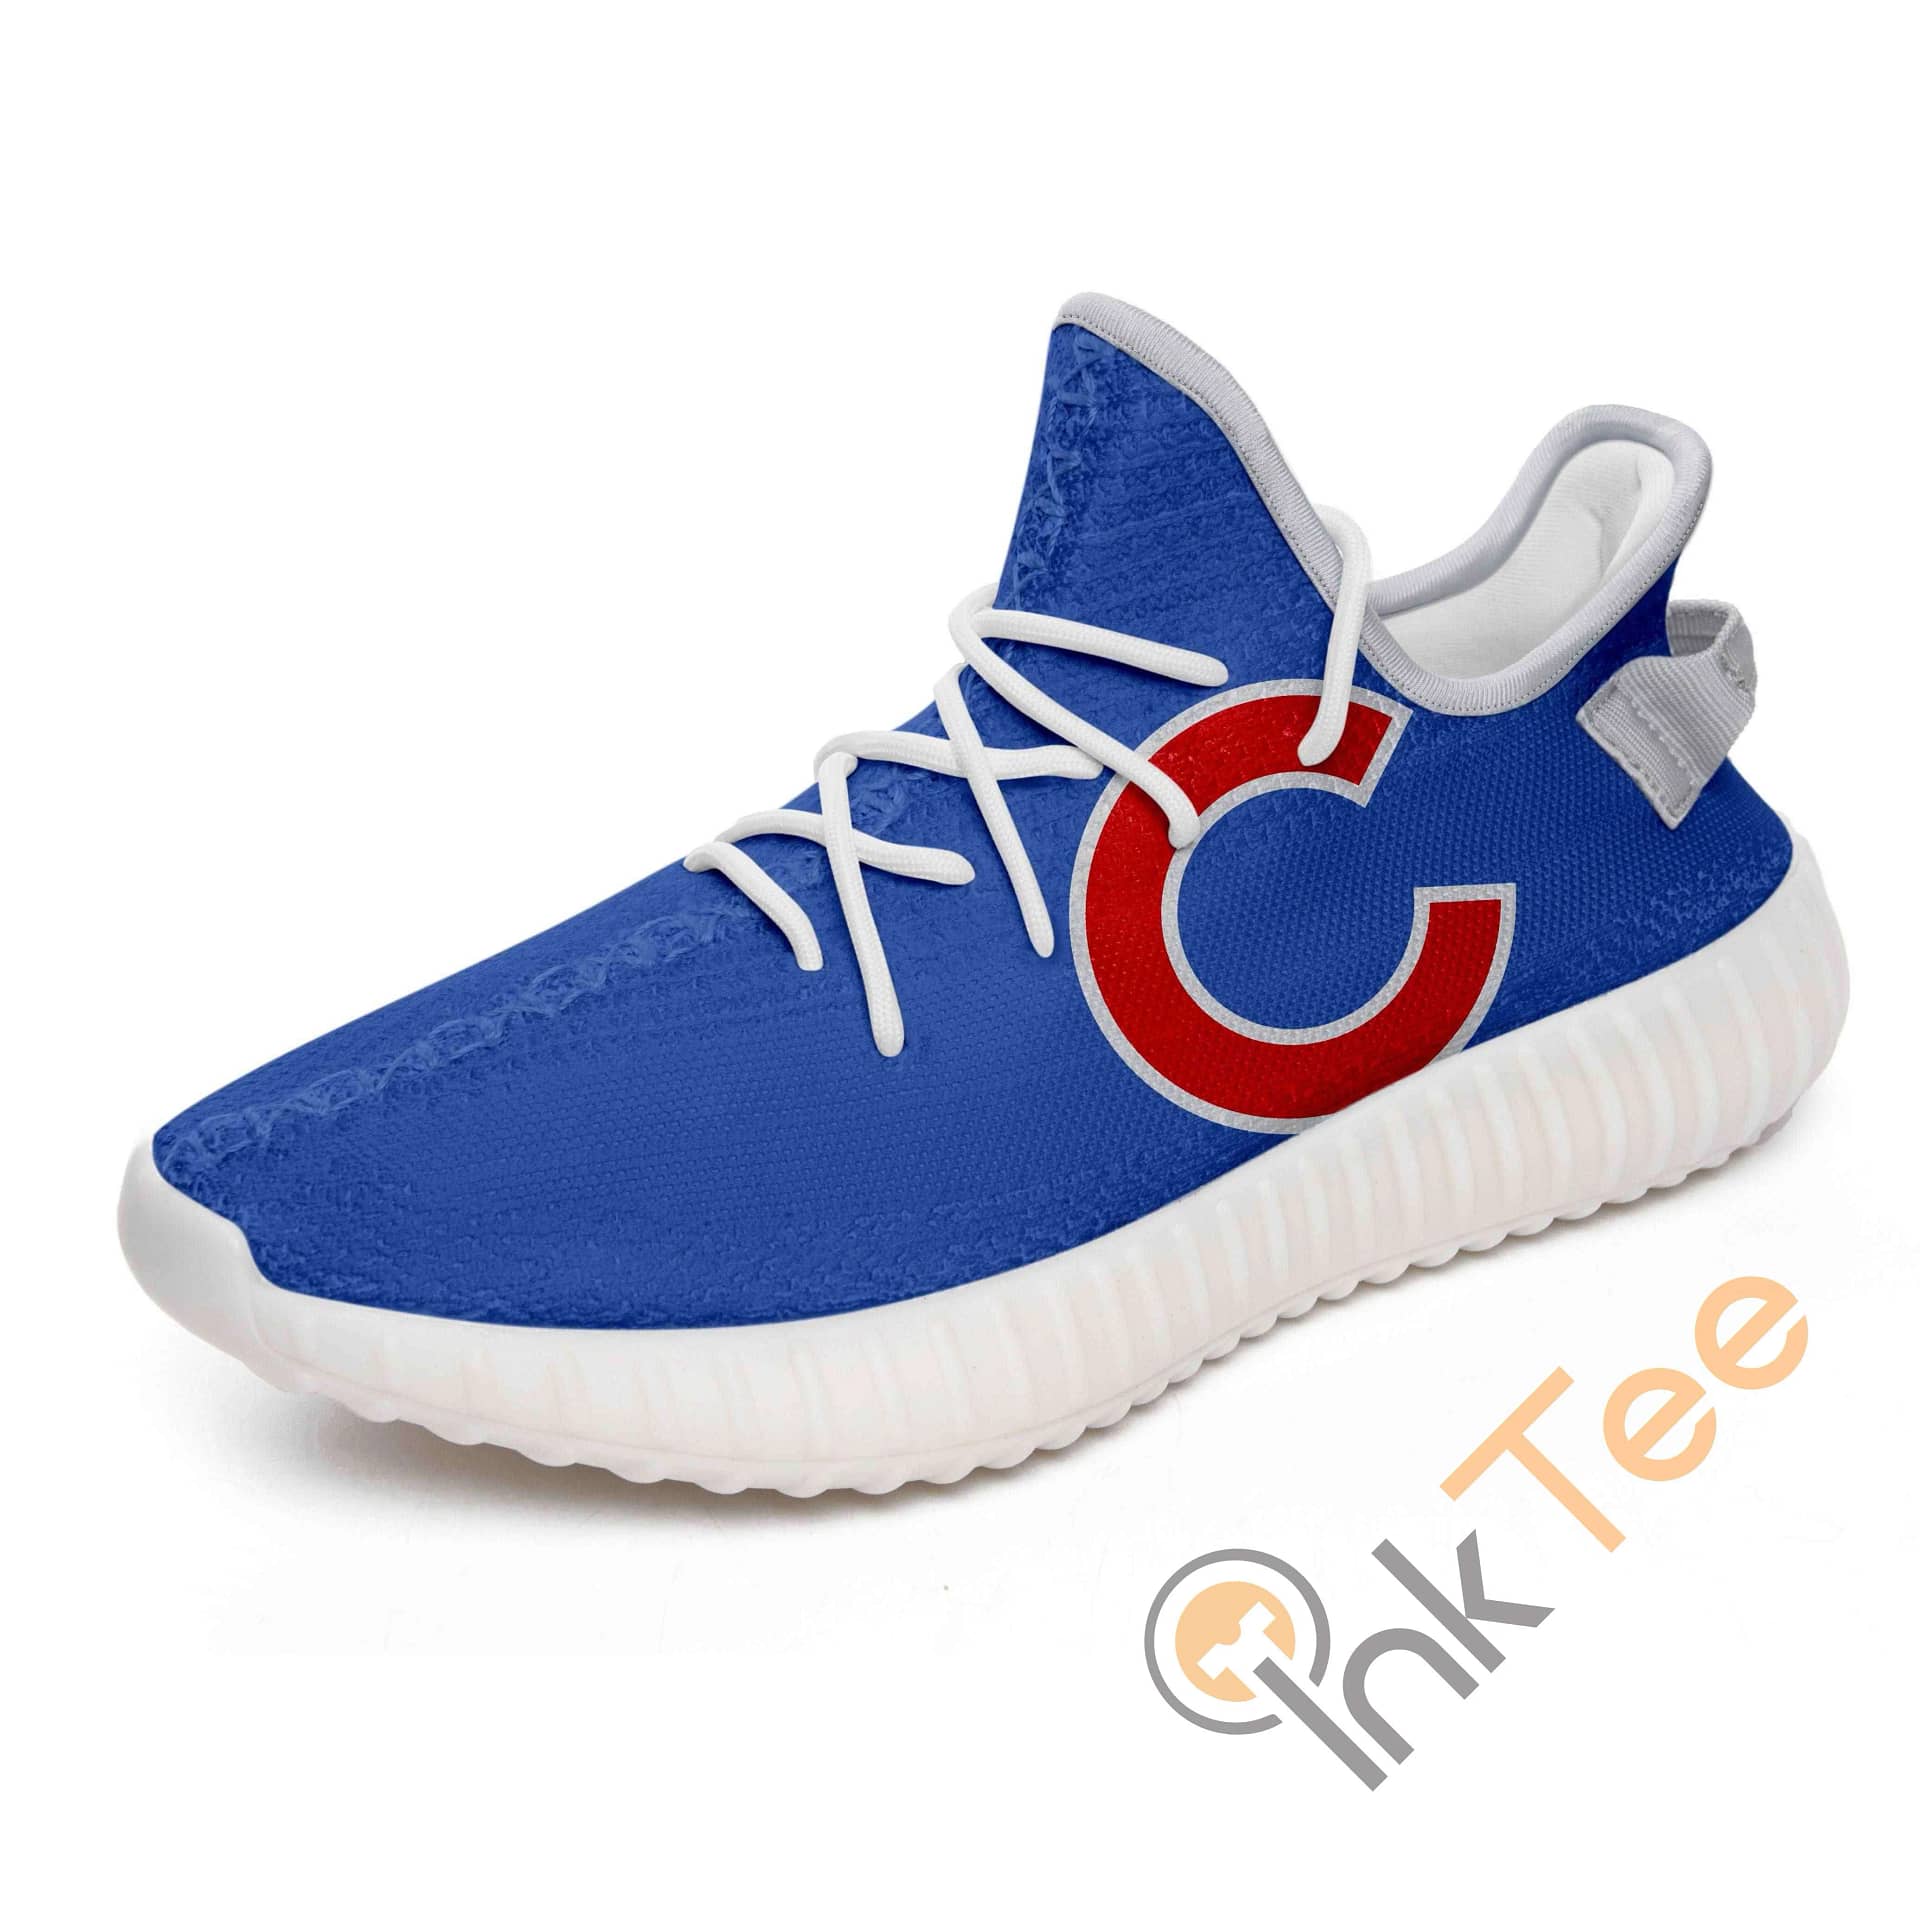 Chicago Cubs Nfl Teams Amazon Best Selling Yeezy Boost